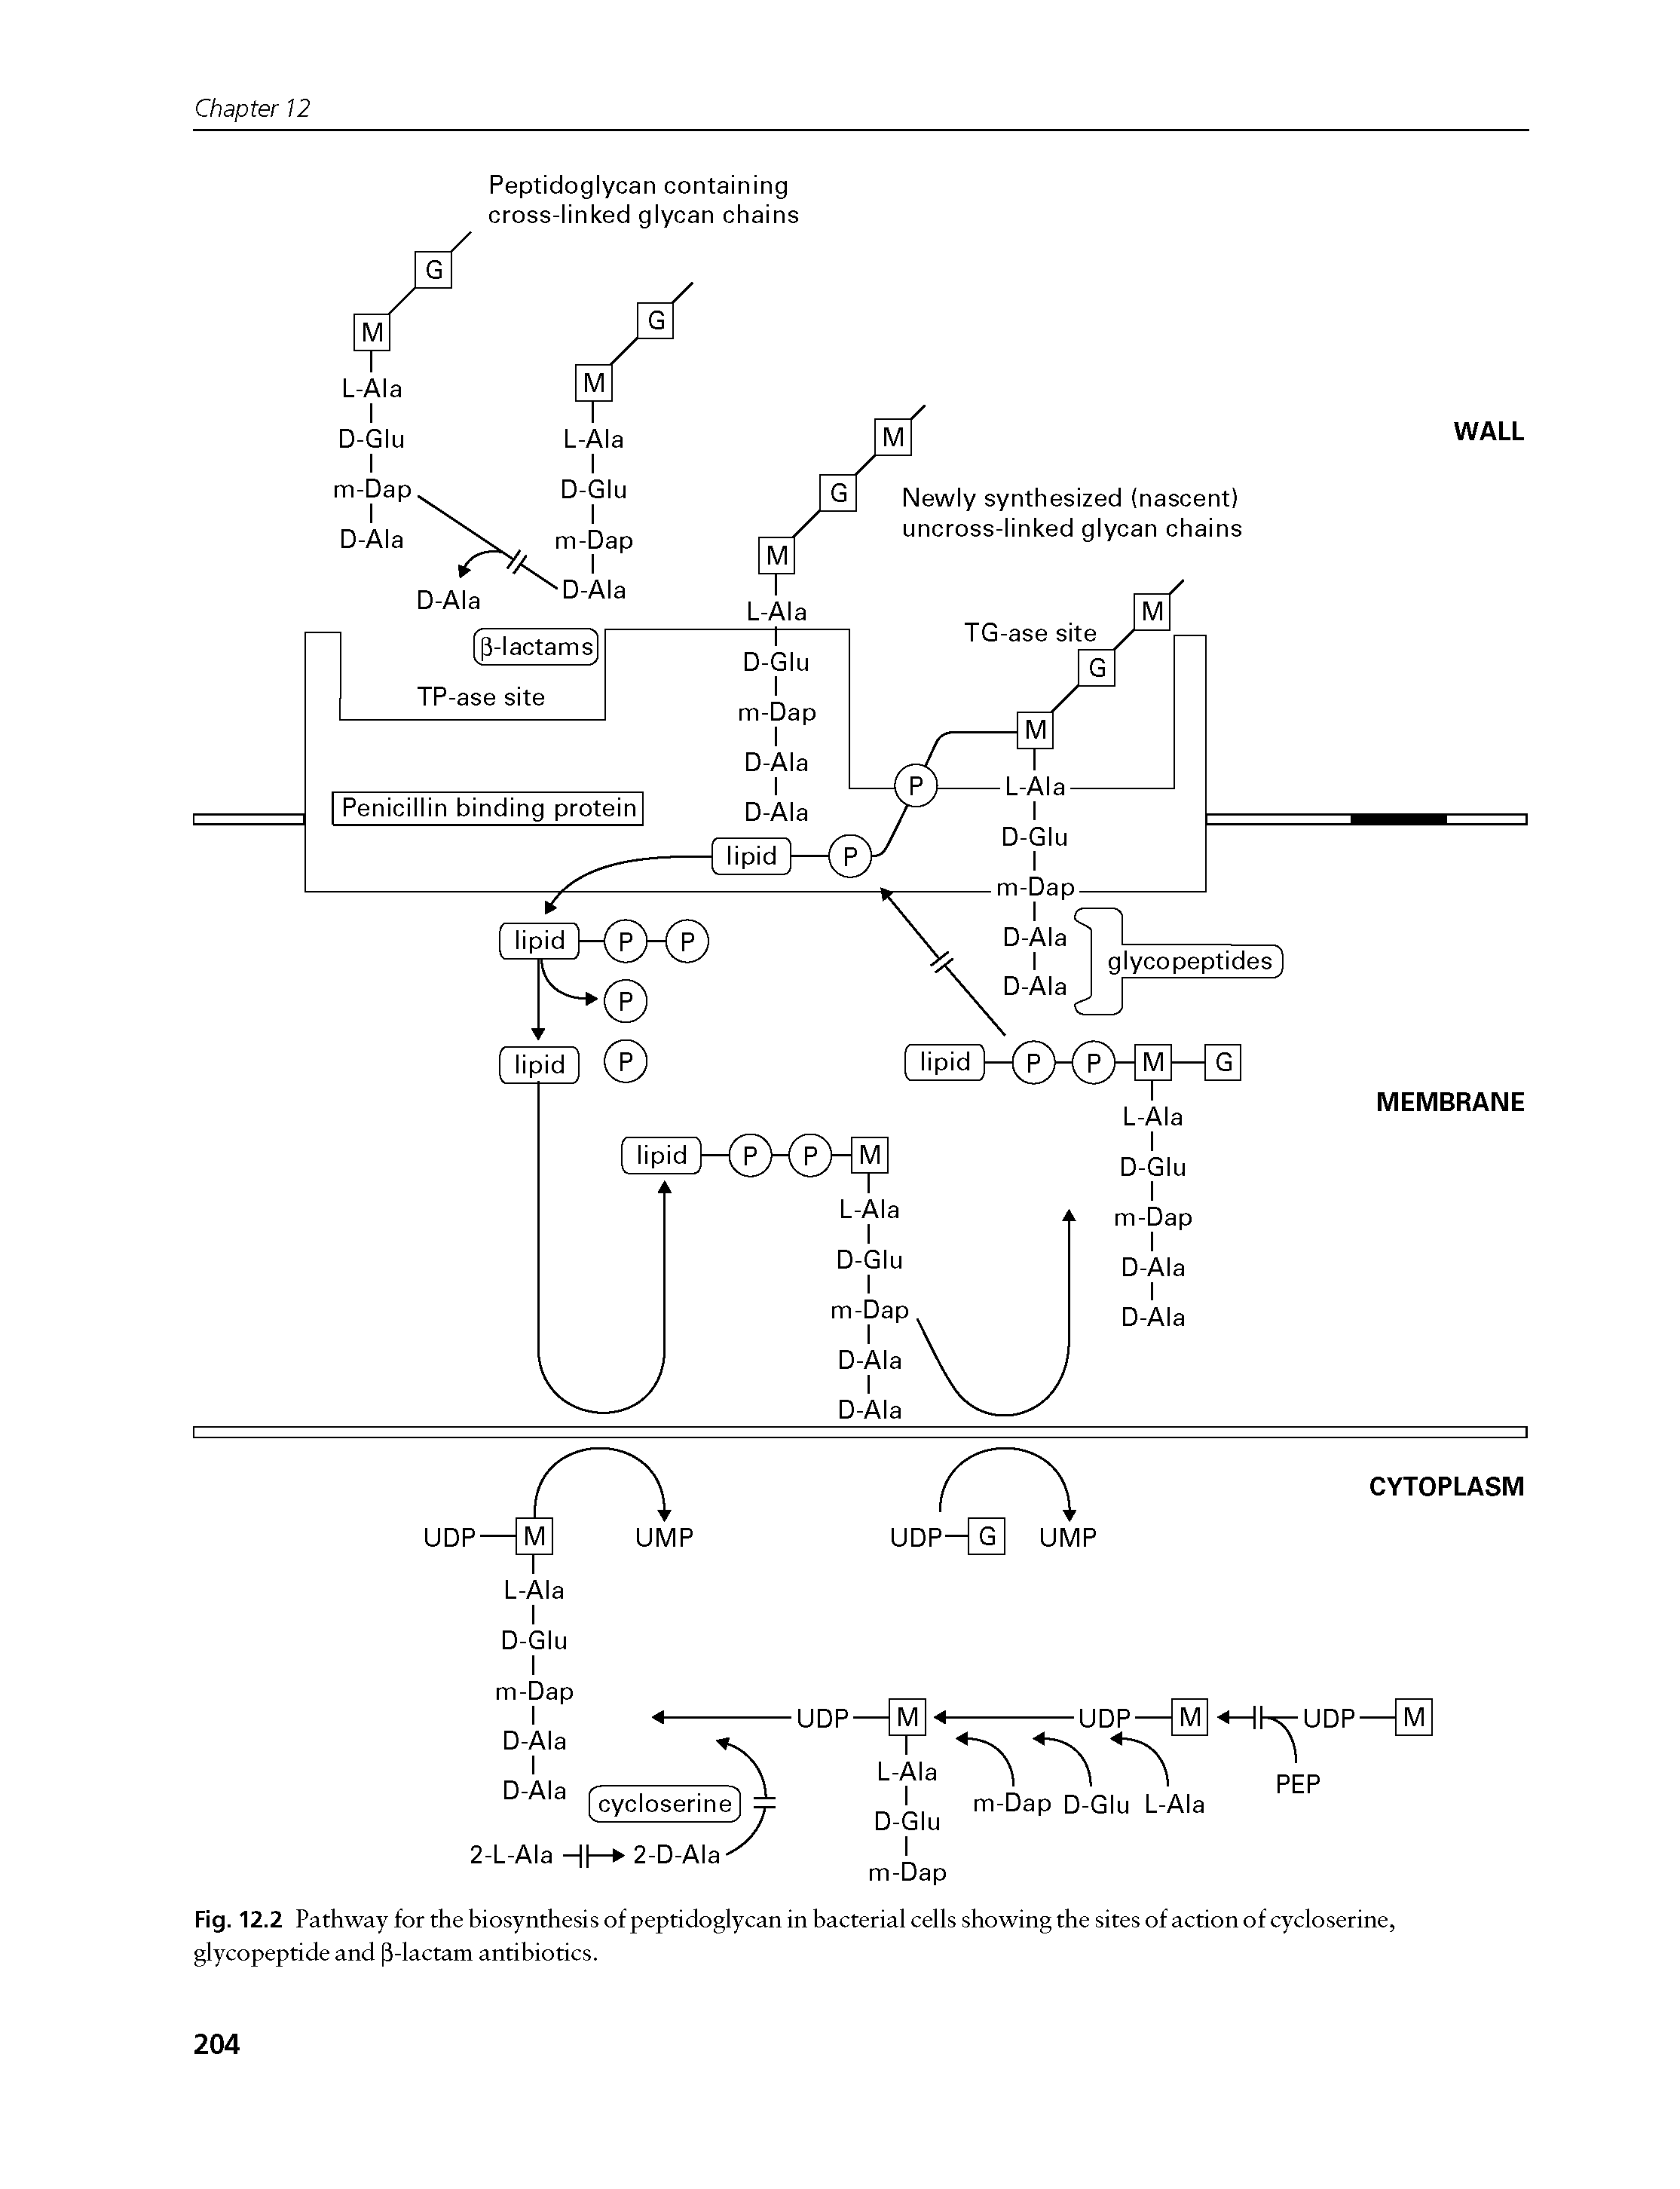 Fig. 12.2 Pathway for the biosynthesis of peptidoglycan in bacterial cells showing the sites of action of cycloserine, glycopeptide and p-lactam antibiotics.